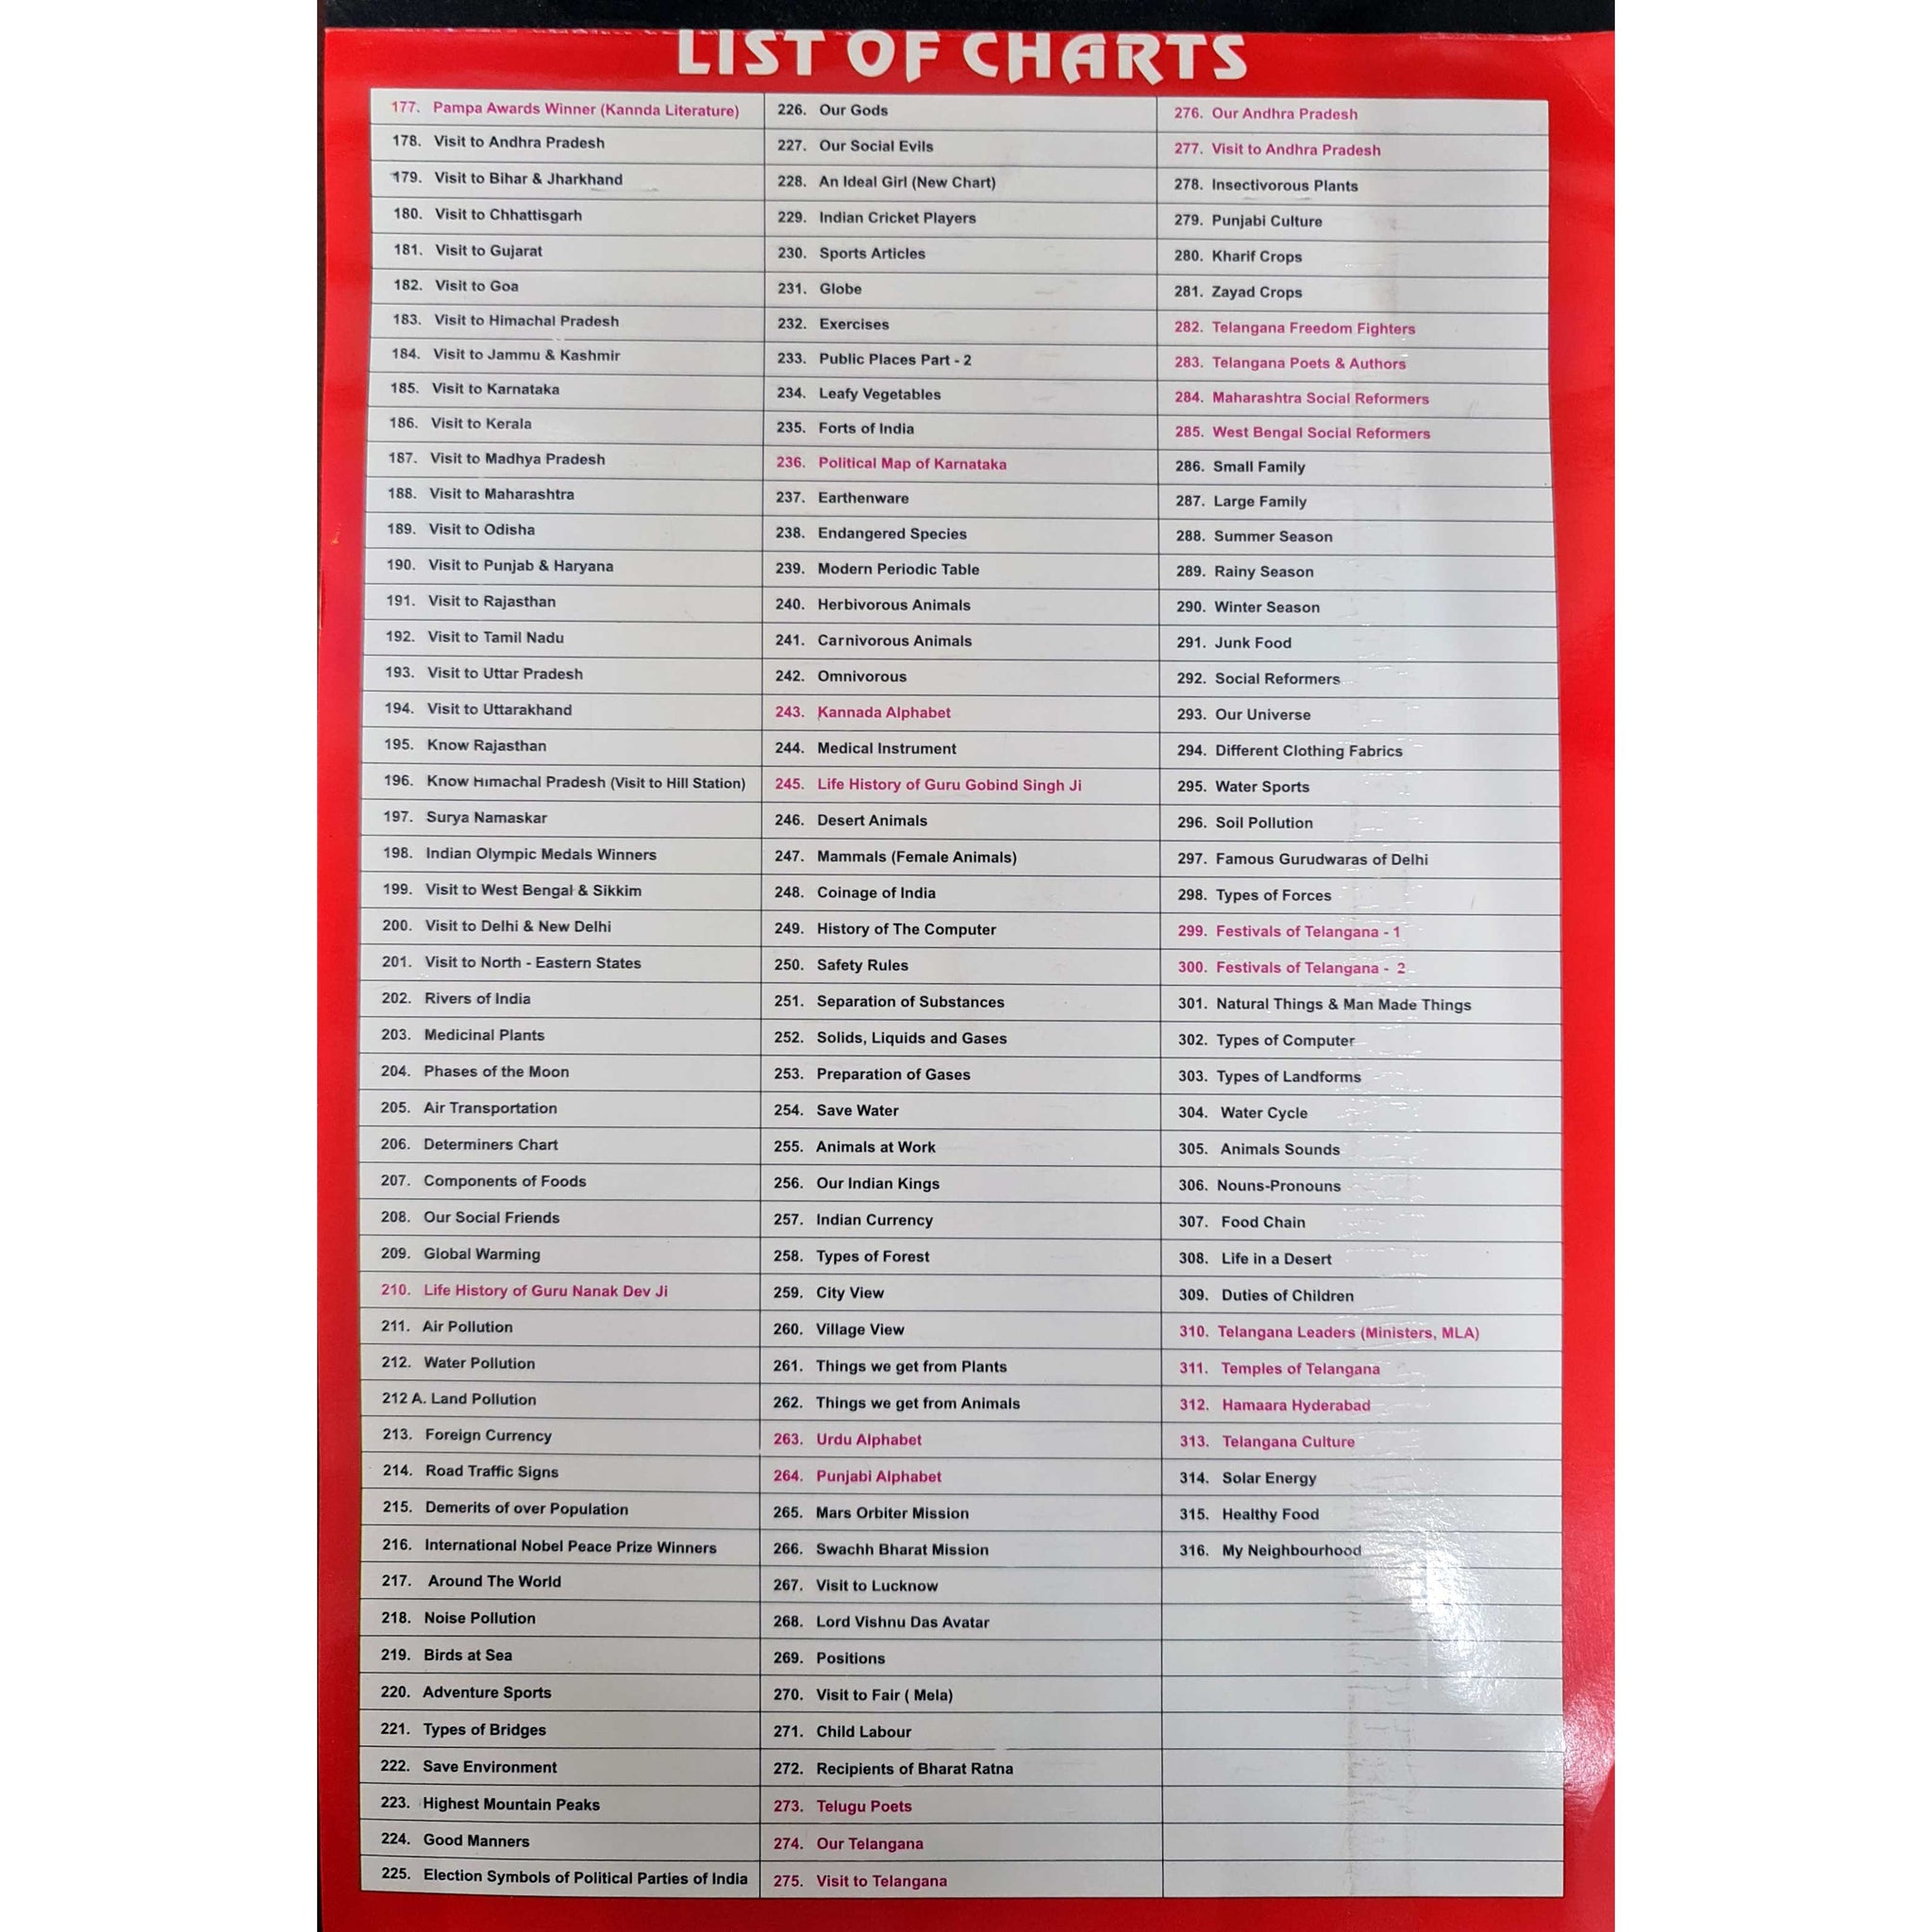 Cut and Paste Album of Charts Part A and Part B (More than 300 charts) - Indian Book Depot (Map House)